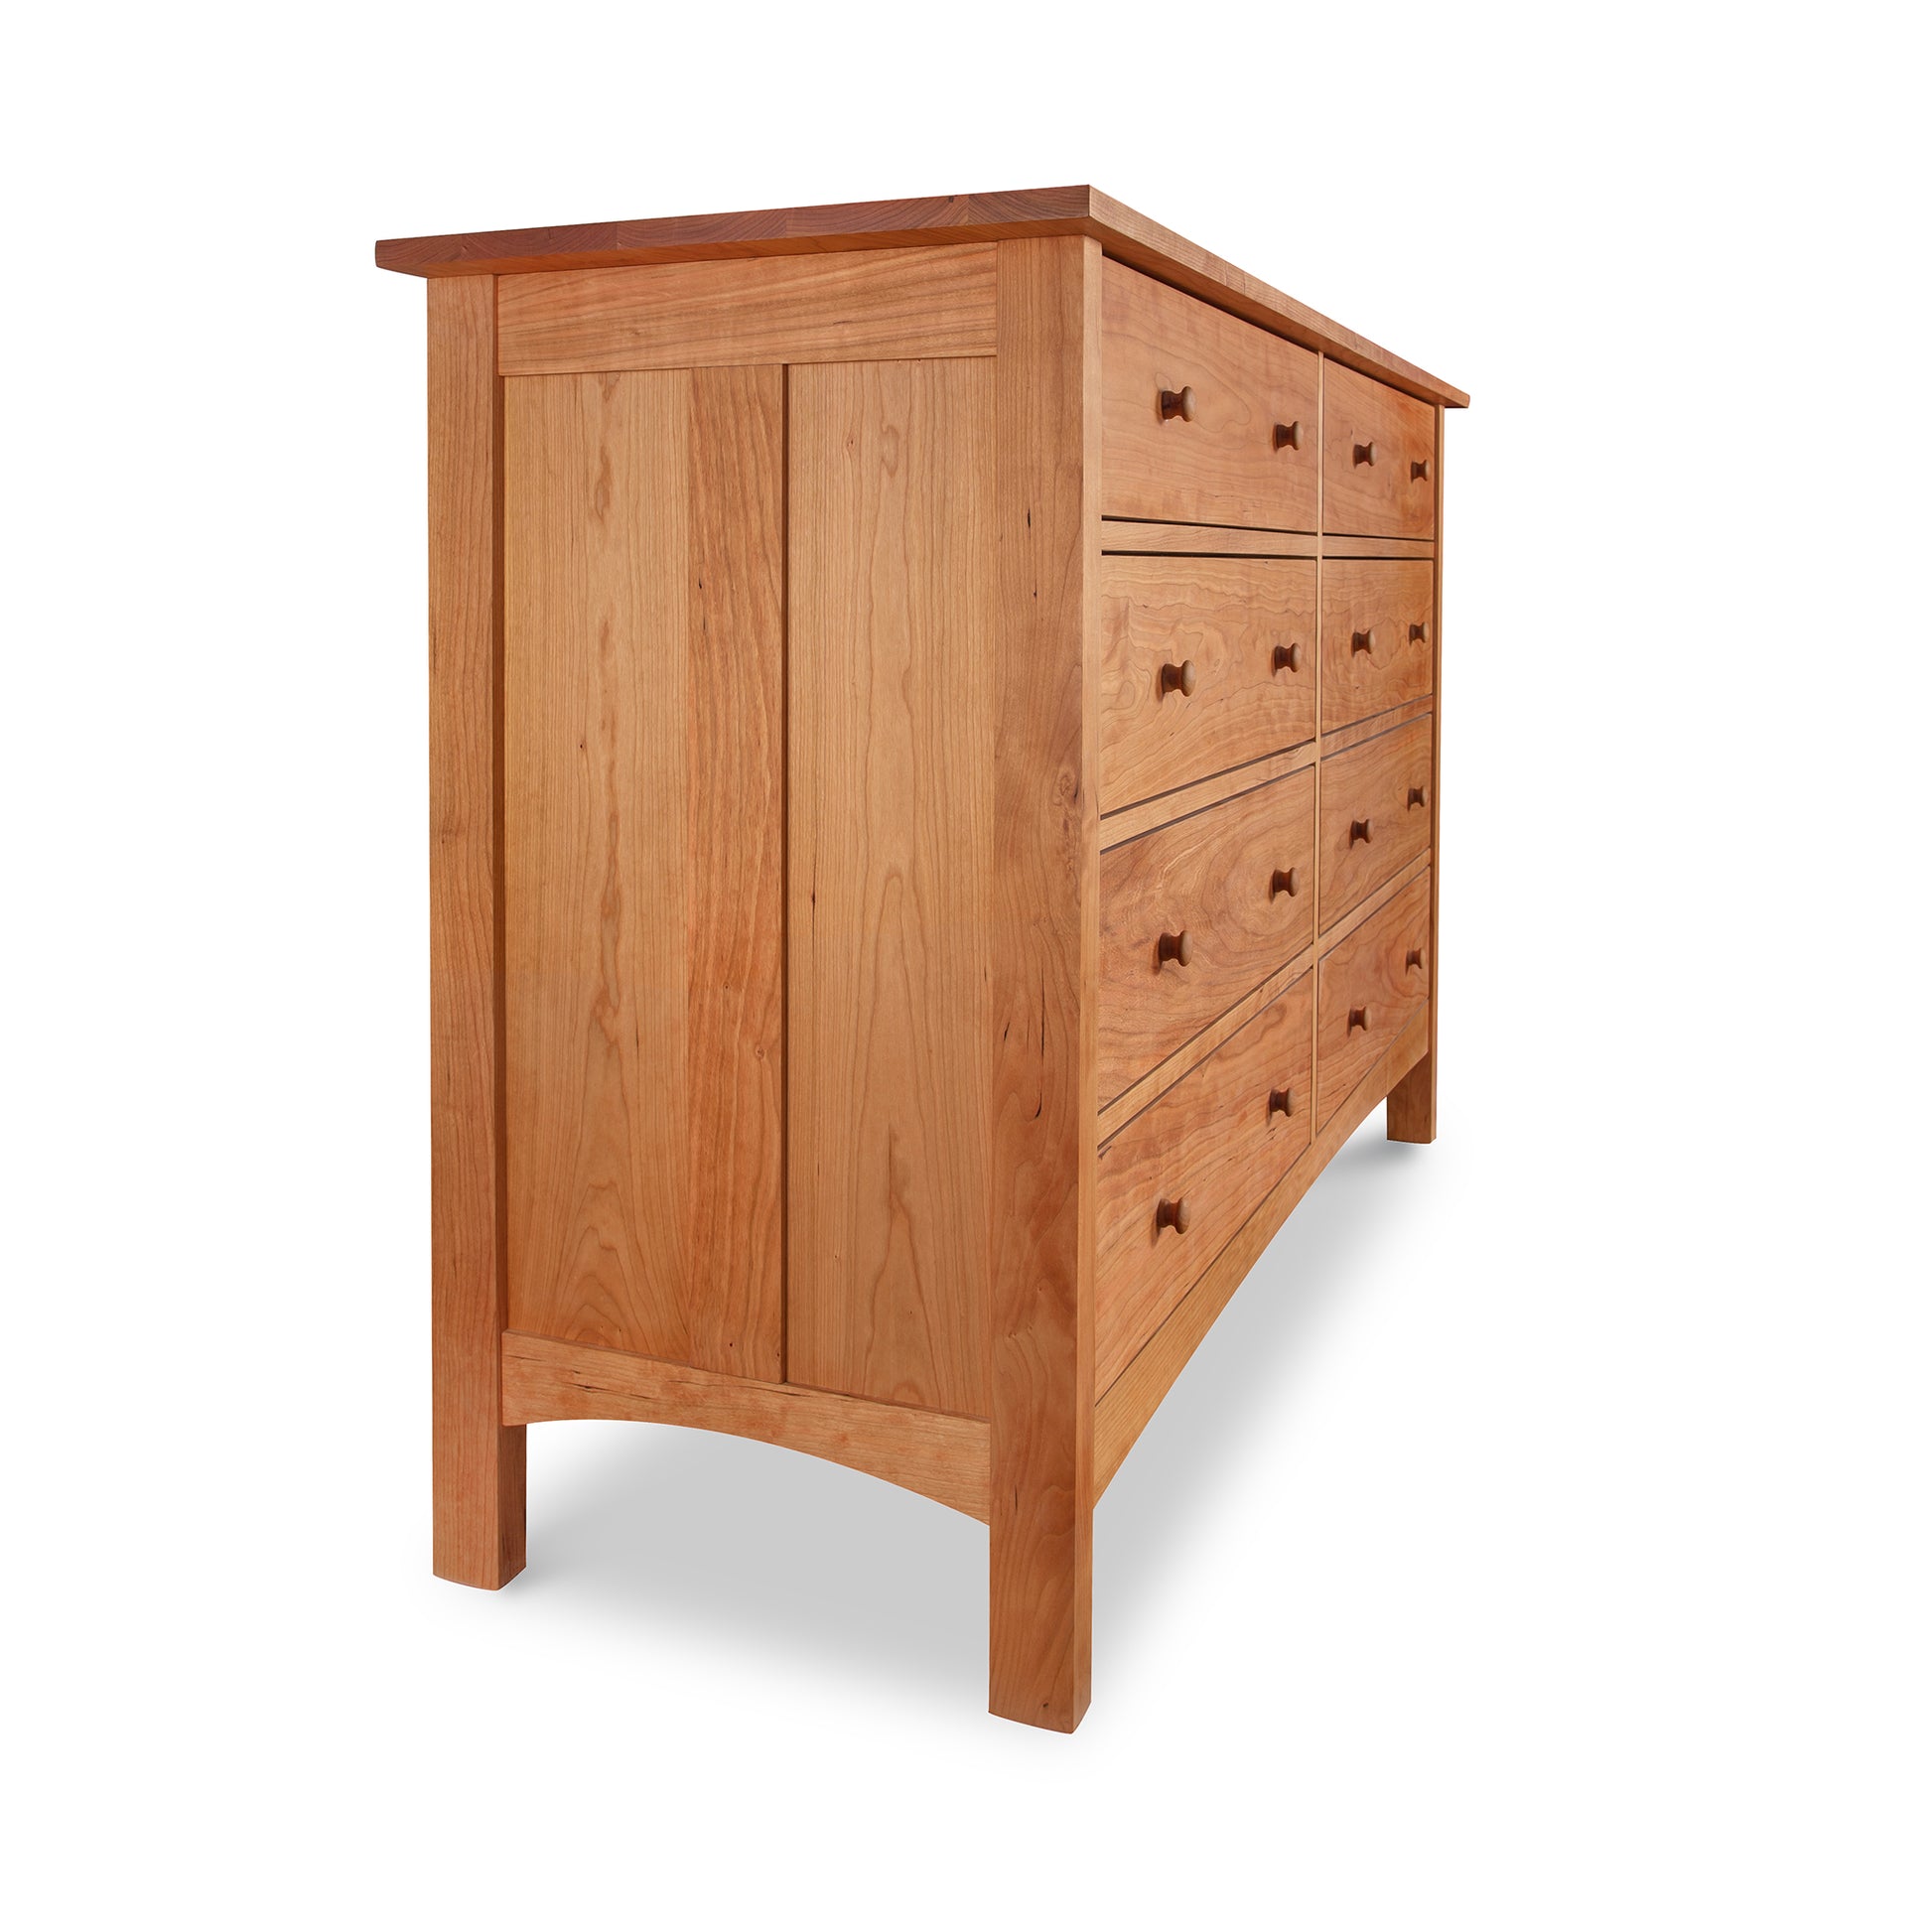 Vermont Furniture Designs' Burlington Shaker 8-Drawer Dresser #1, an eco-friendly wooden dresser with multiple drawers, is featured on a white background.